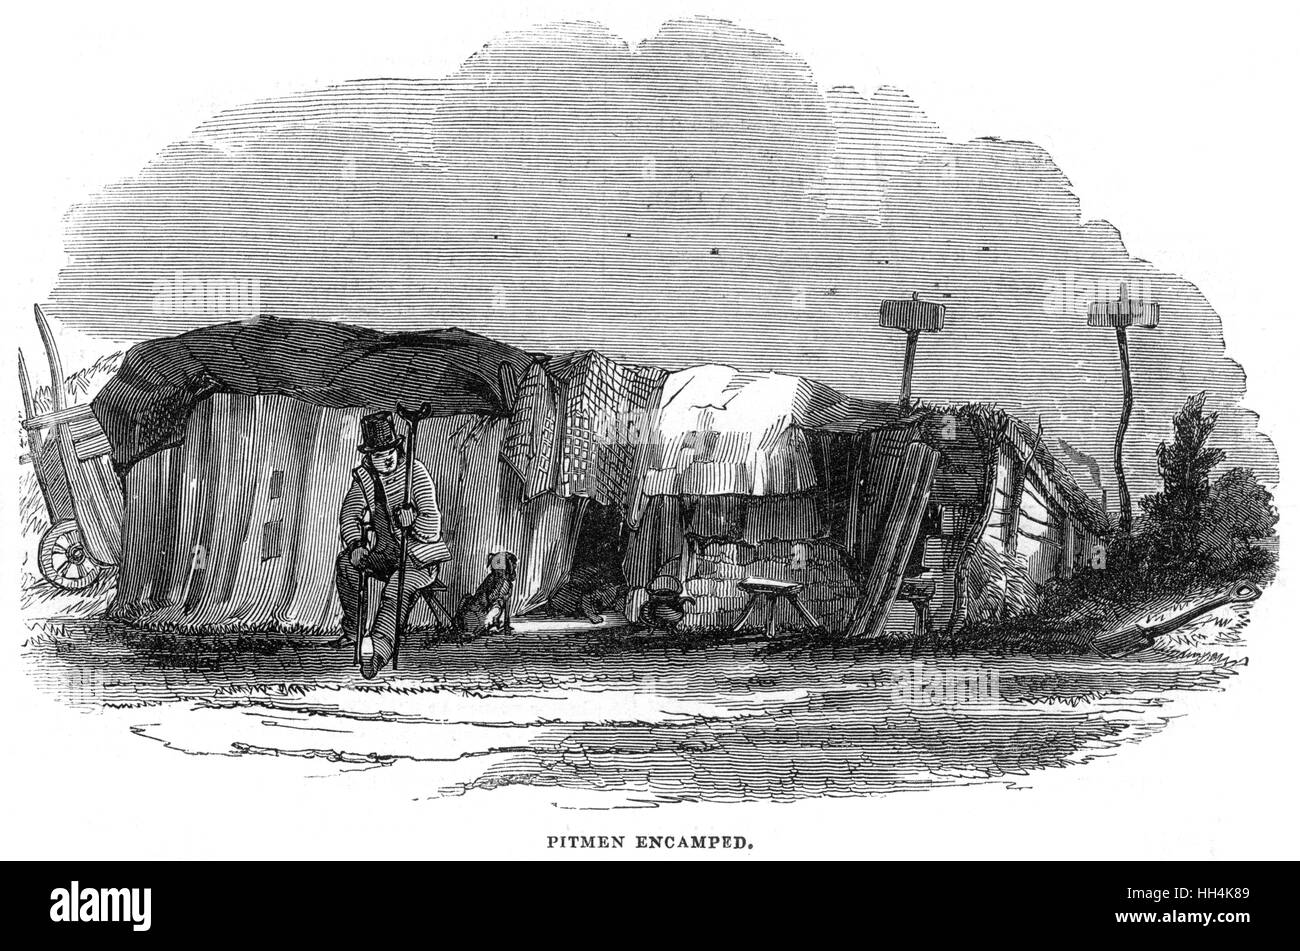 Pitmen encamped - evicted coal miner and his dwelling Stock Photo